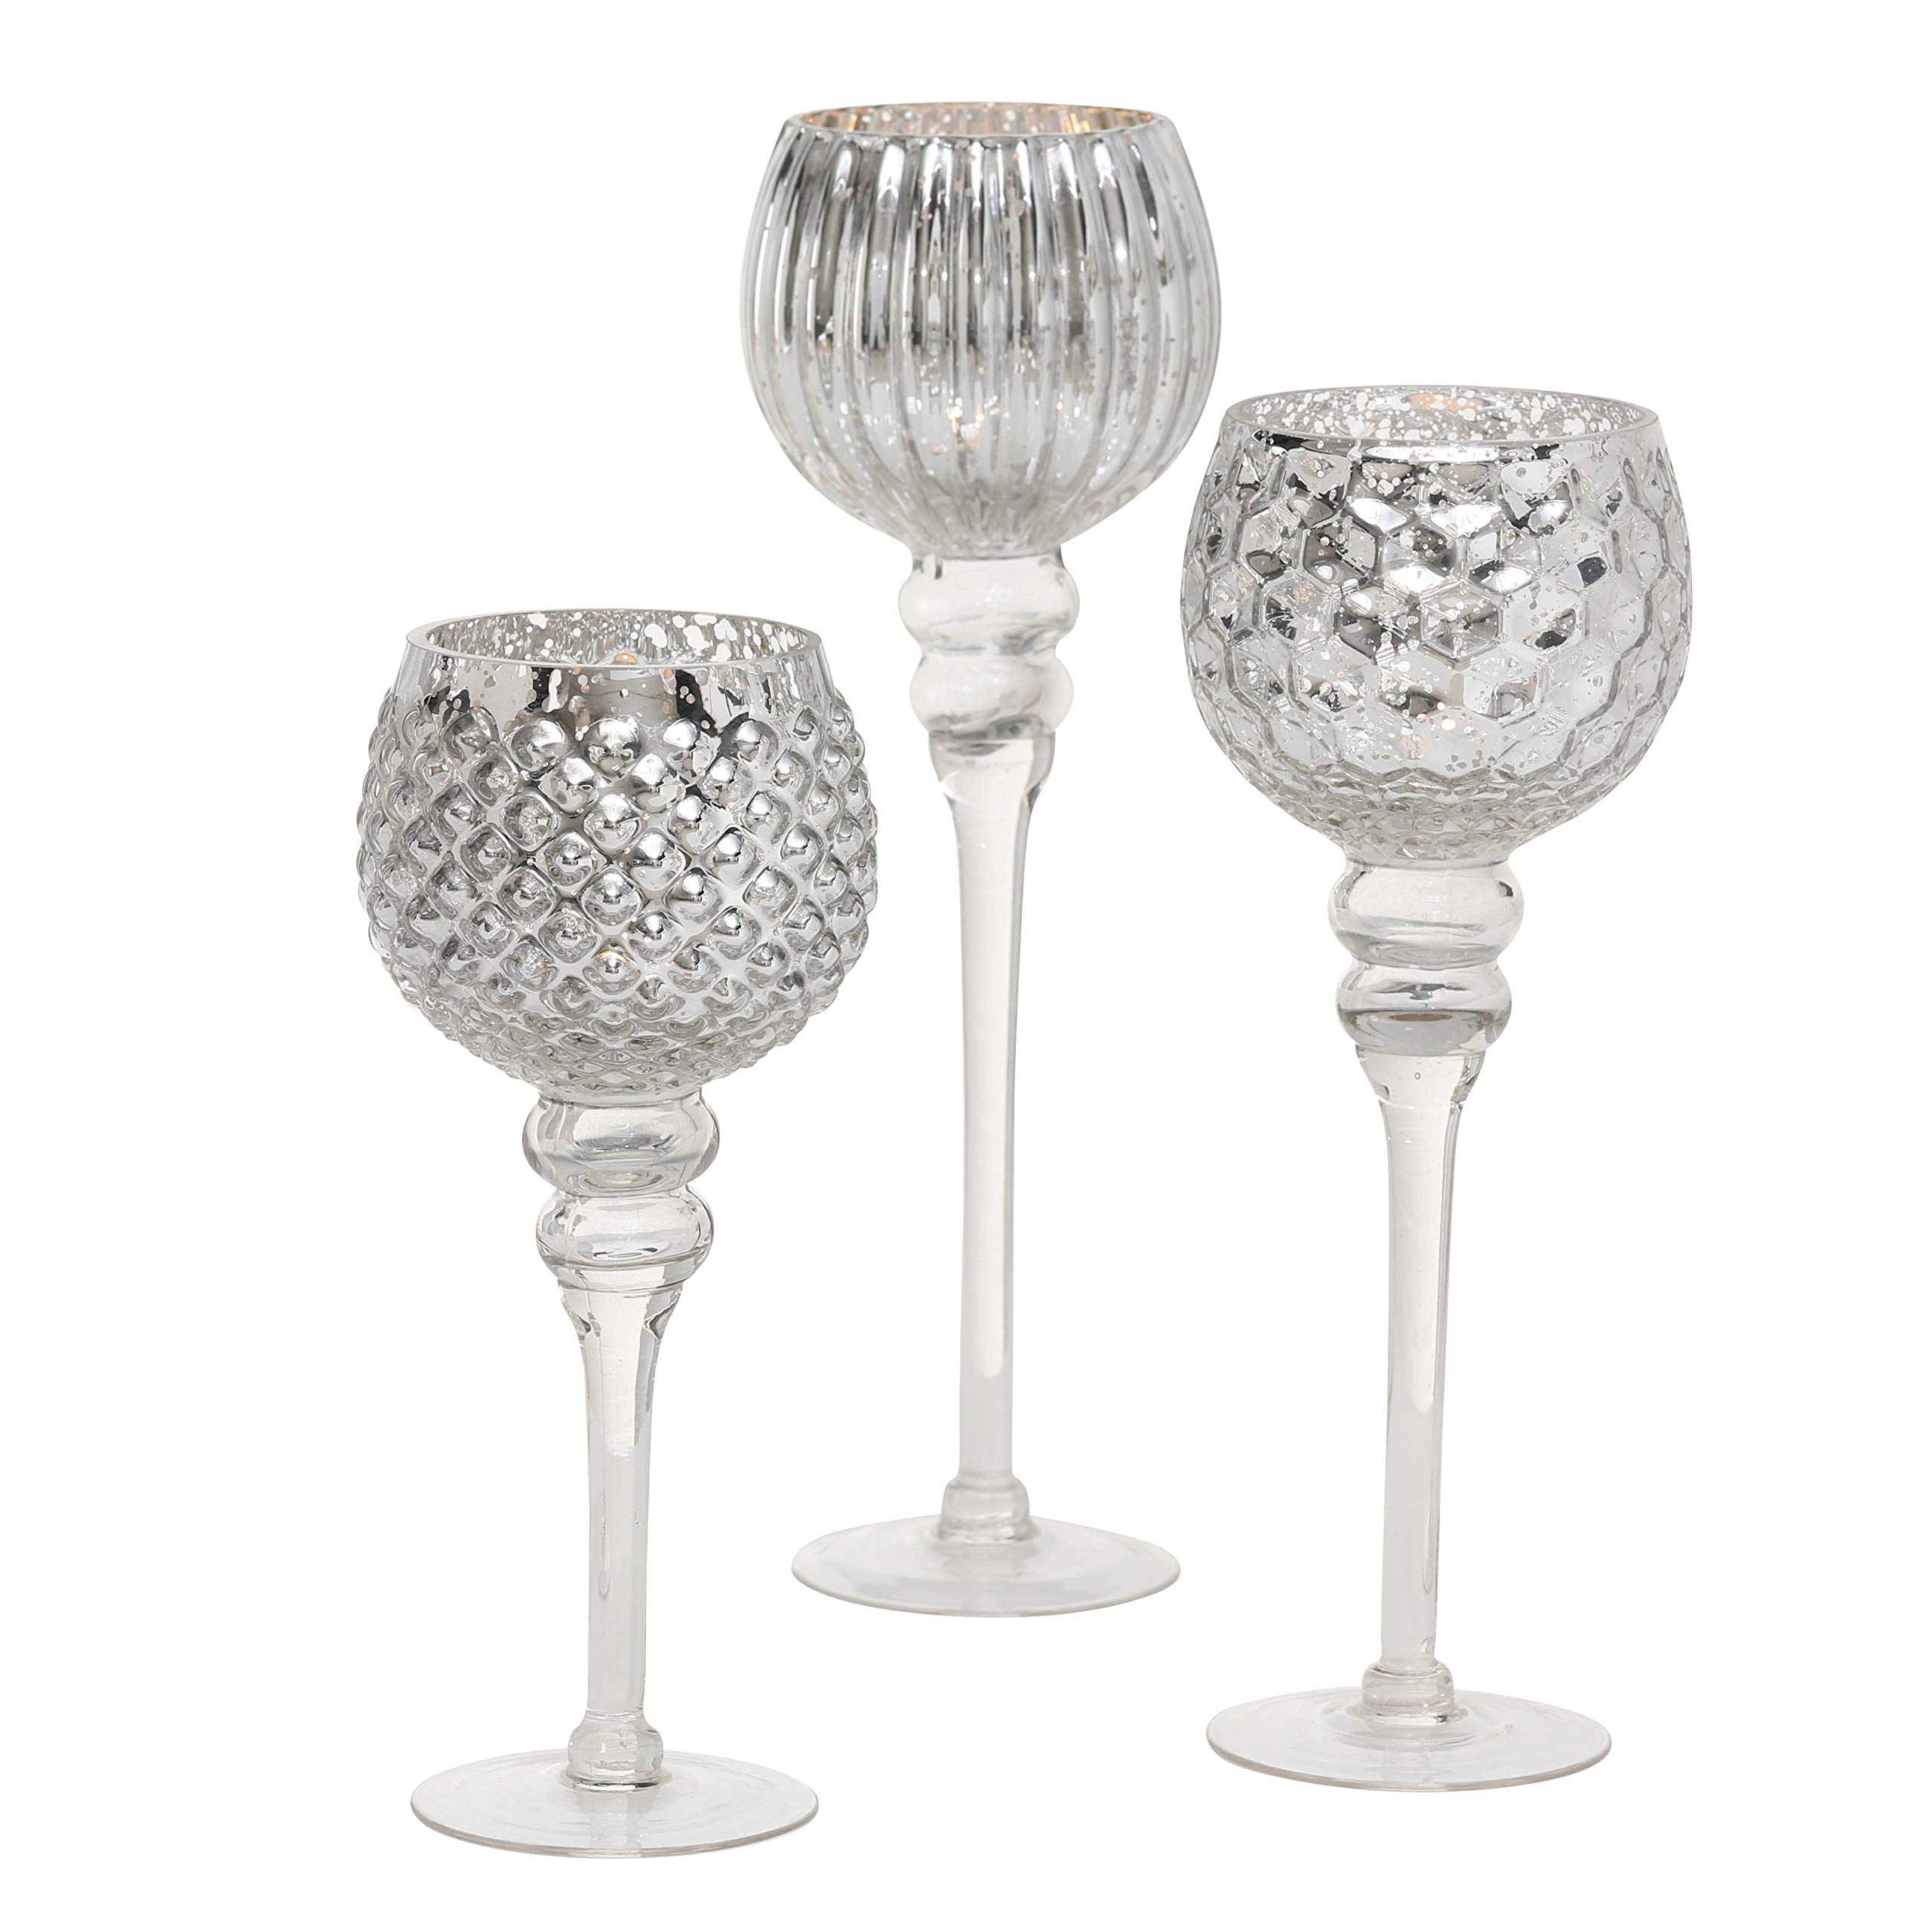 Spectacular Cape Cod Long Stem Candle Holders, 3 Pieces, Silver Mercury Glass, Mix Match Set, Proportioned at 11.75, 9.75, and 7 Inches Tall, For T...